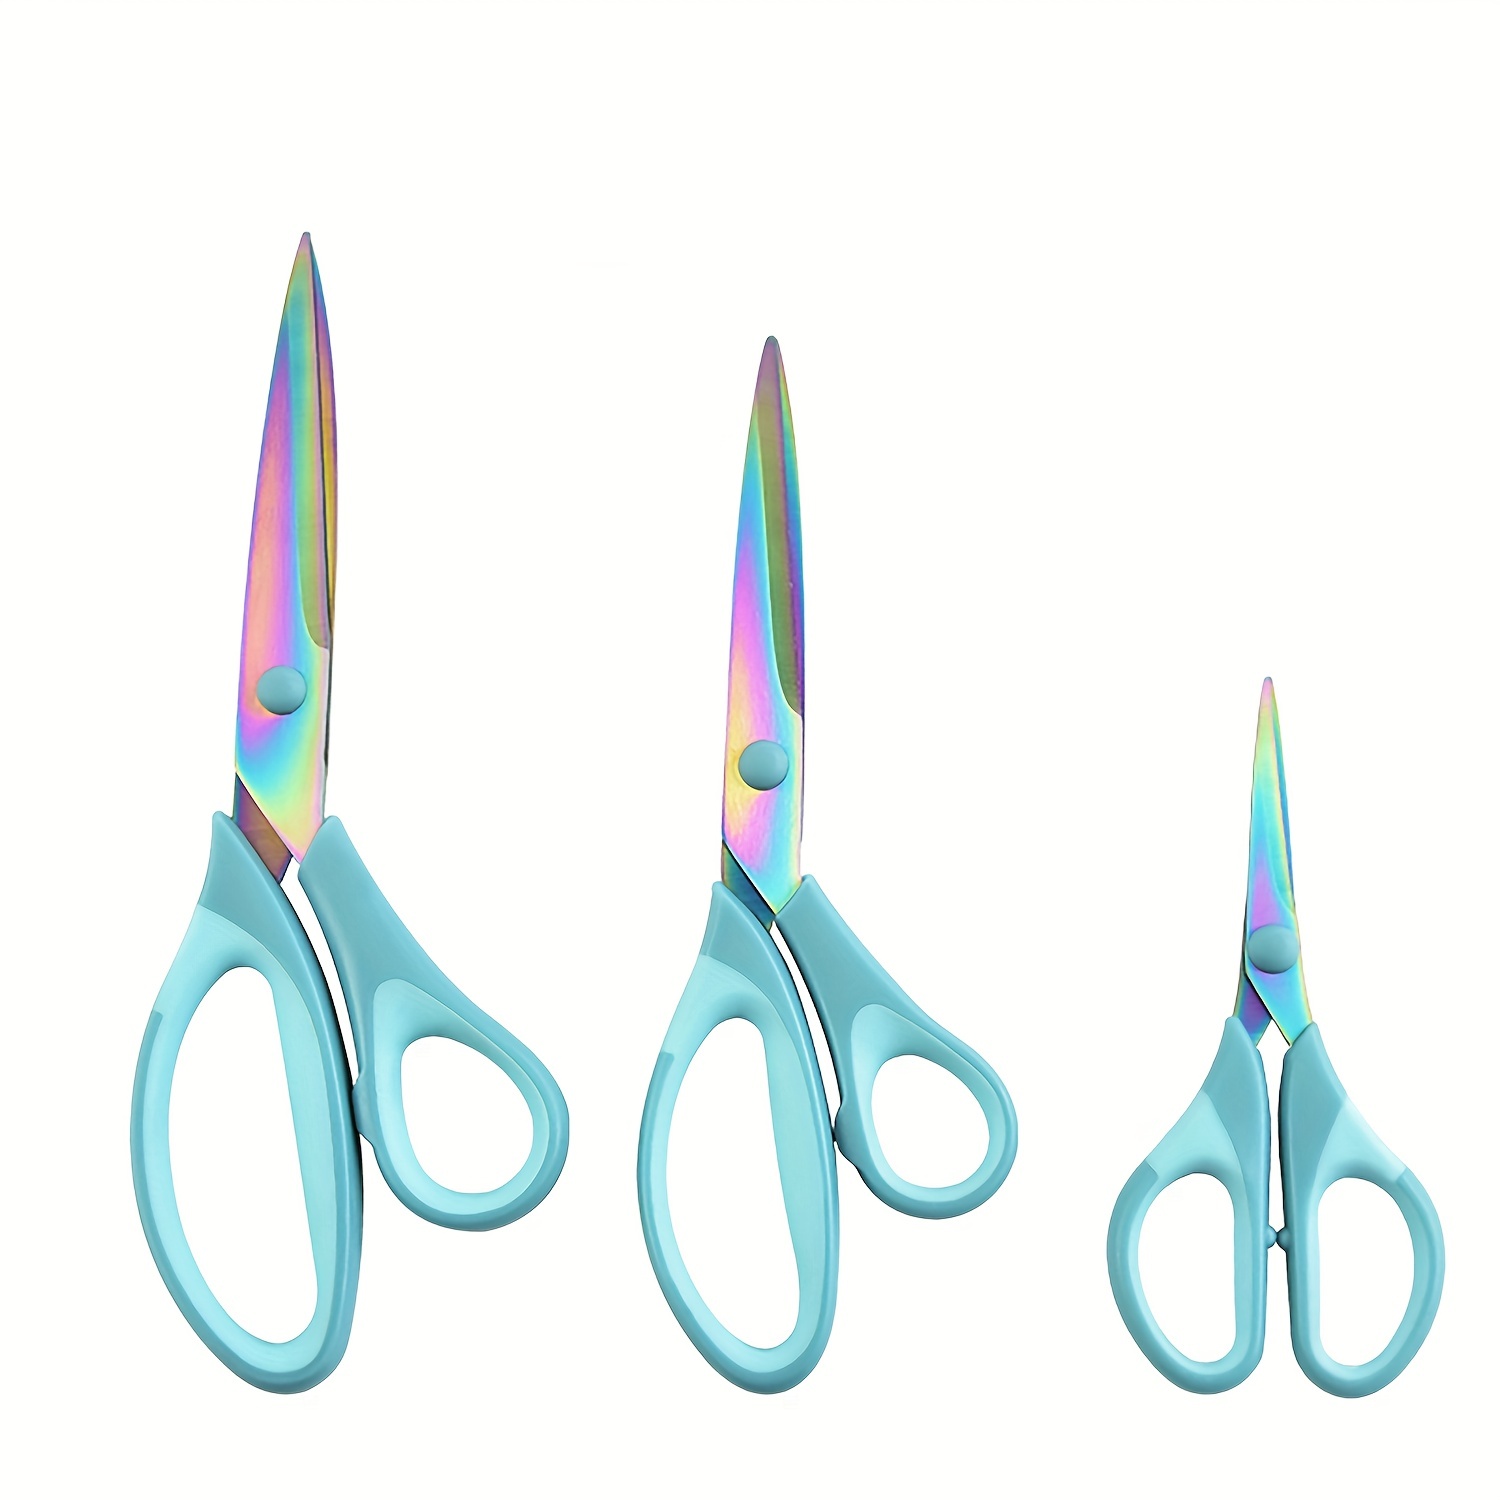 Dropship Extra Sharp Black-Bladed Scissors Multi-Purpose Shears, For Fabric  Leather, Home & Office, Art & School, Household, Children's Scissors to  Sell Online at a Lower Price